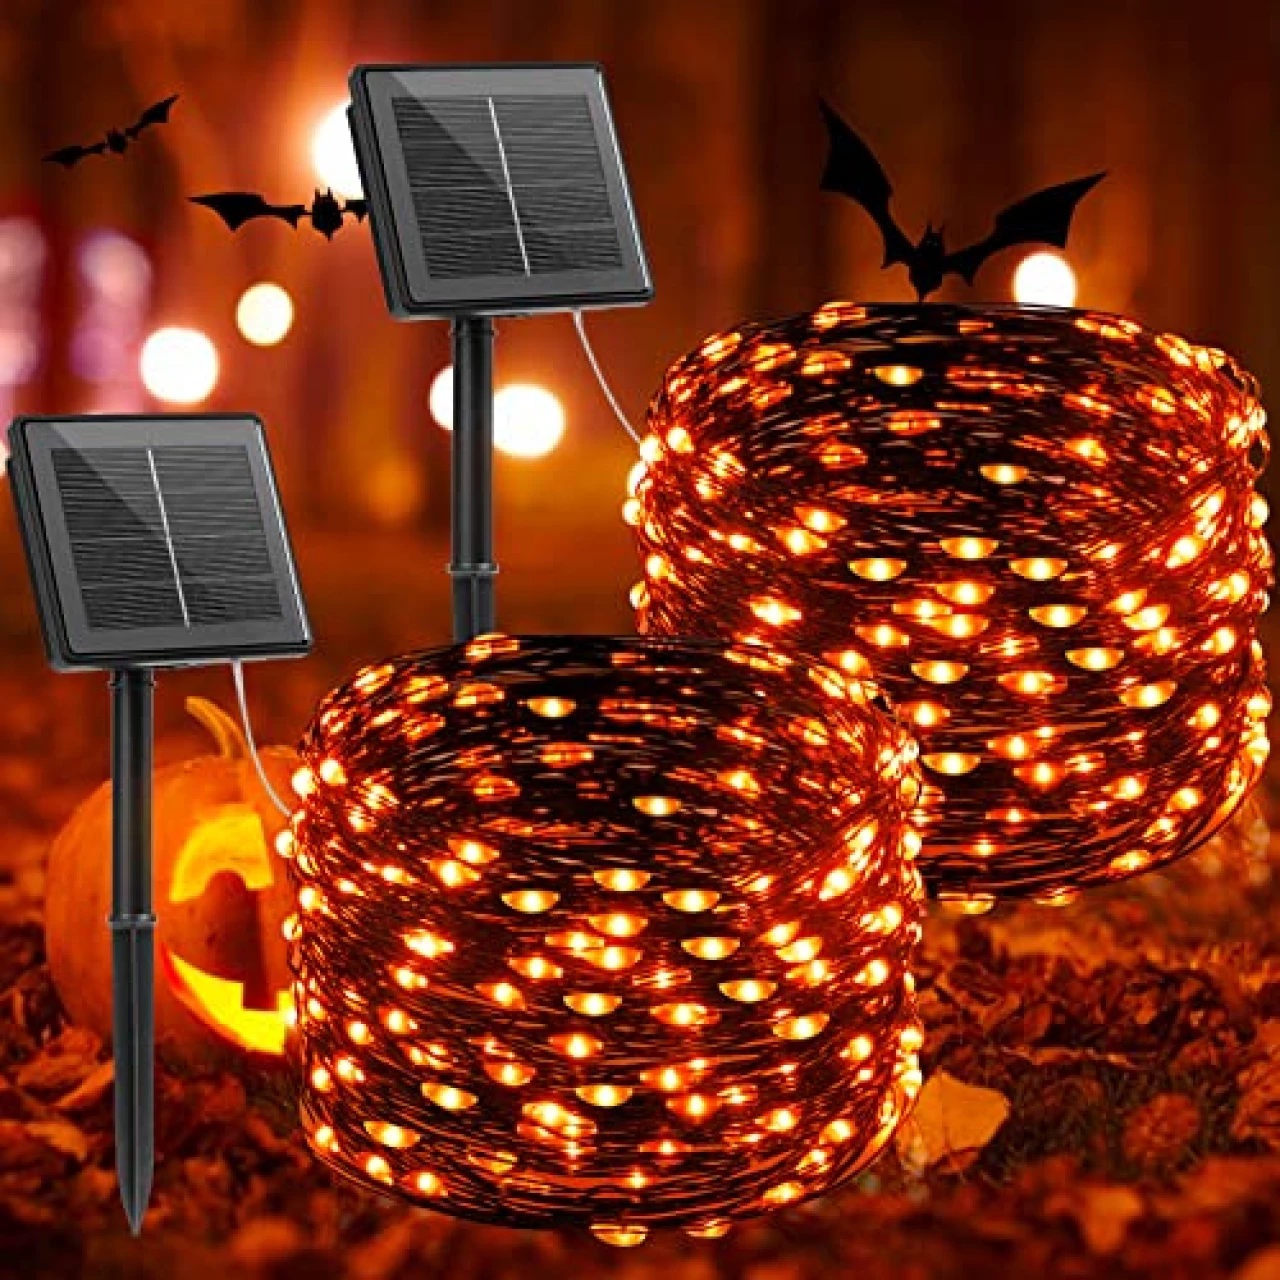 Orange Lights, 2 Packs Each 66 Feet 200 LED Solar Fairy Lights, Halloween Lights Outdoor with 8 Modes, Waterproof Twinkle Fall Lights for Patio Yard Trees Party, Black Wire